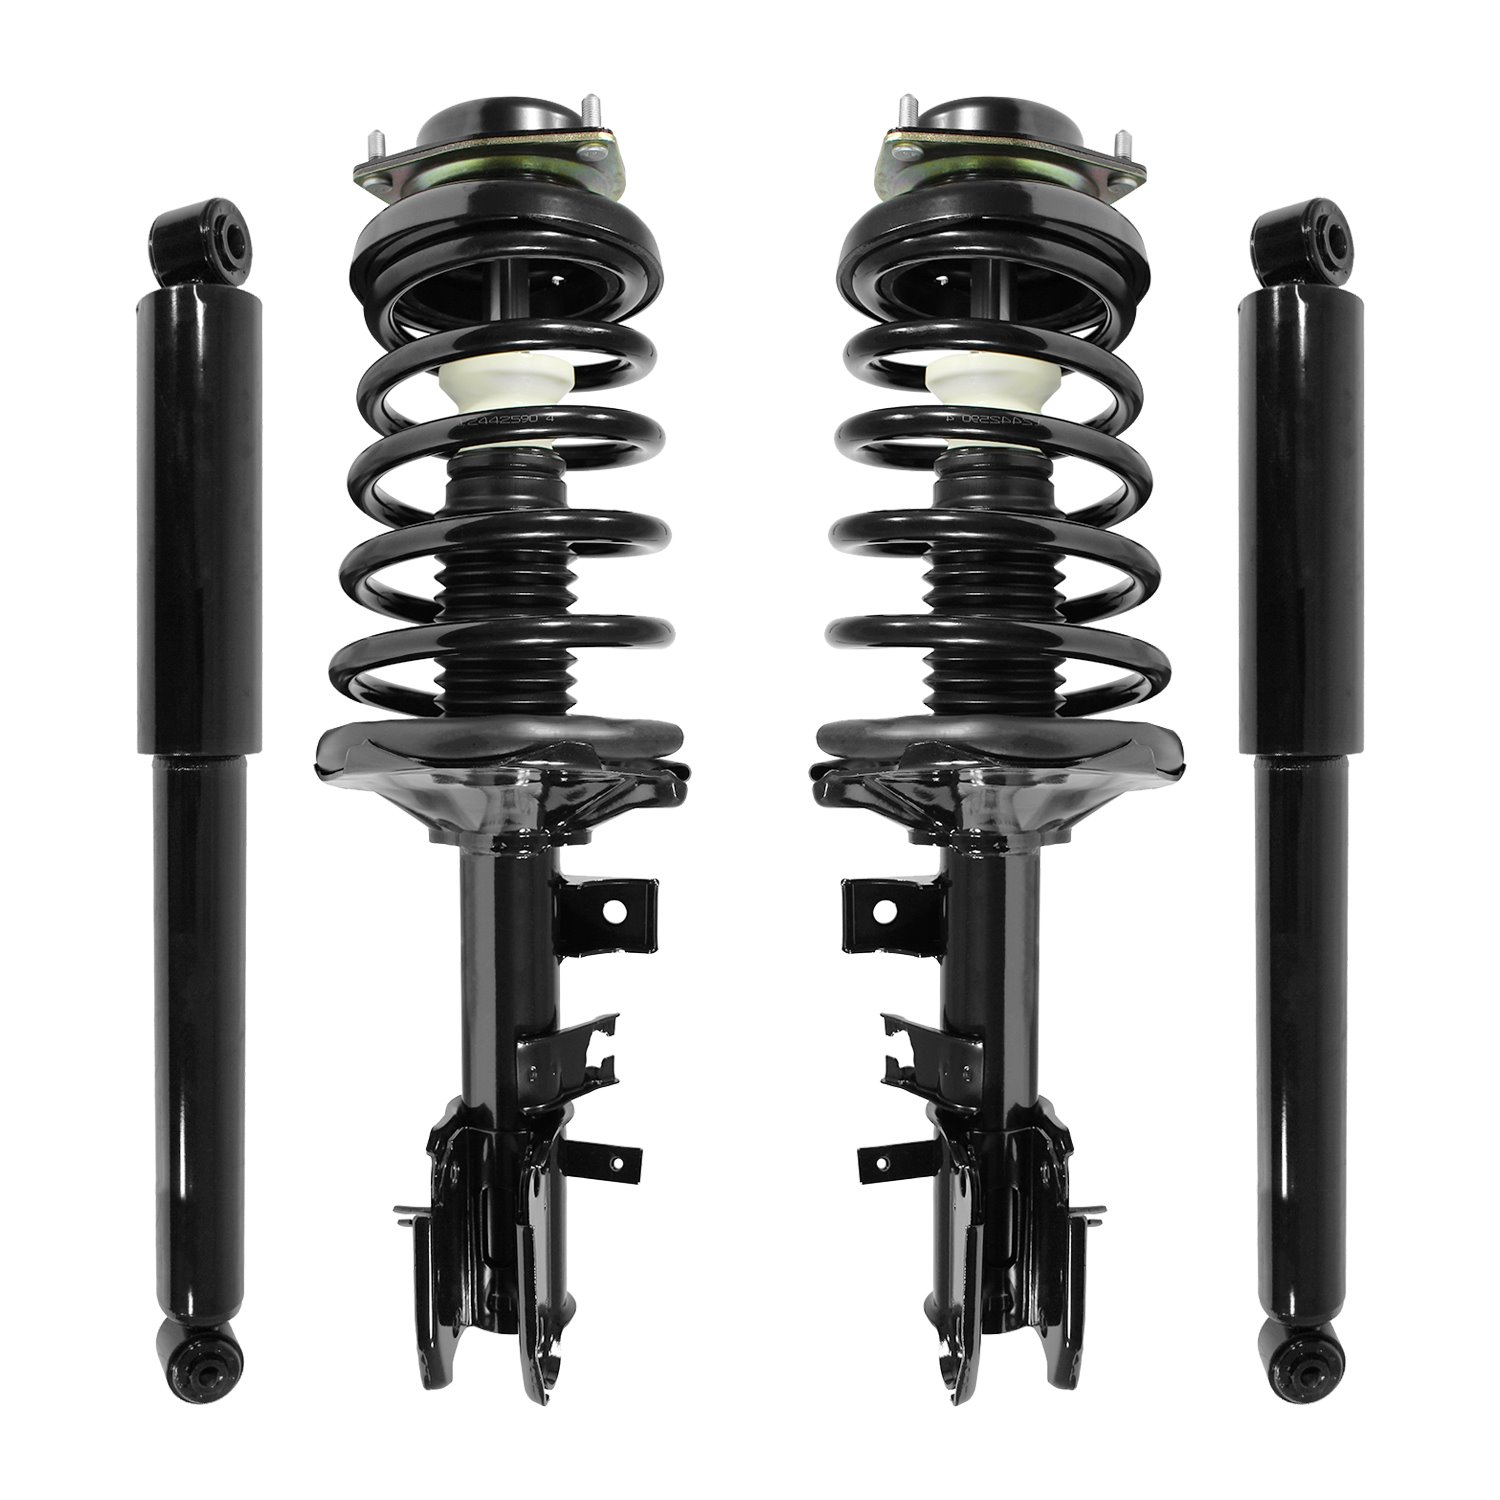 4-11351-255420-001 Front & Rear Suspension Strut & Coil Spring Assembly Fits Select Nissan Pathfinder, Infiniti QX4